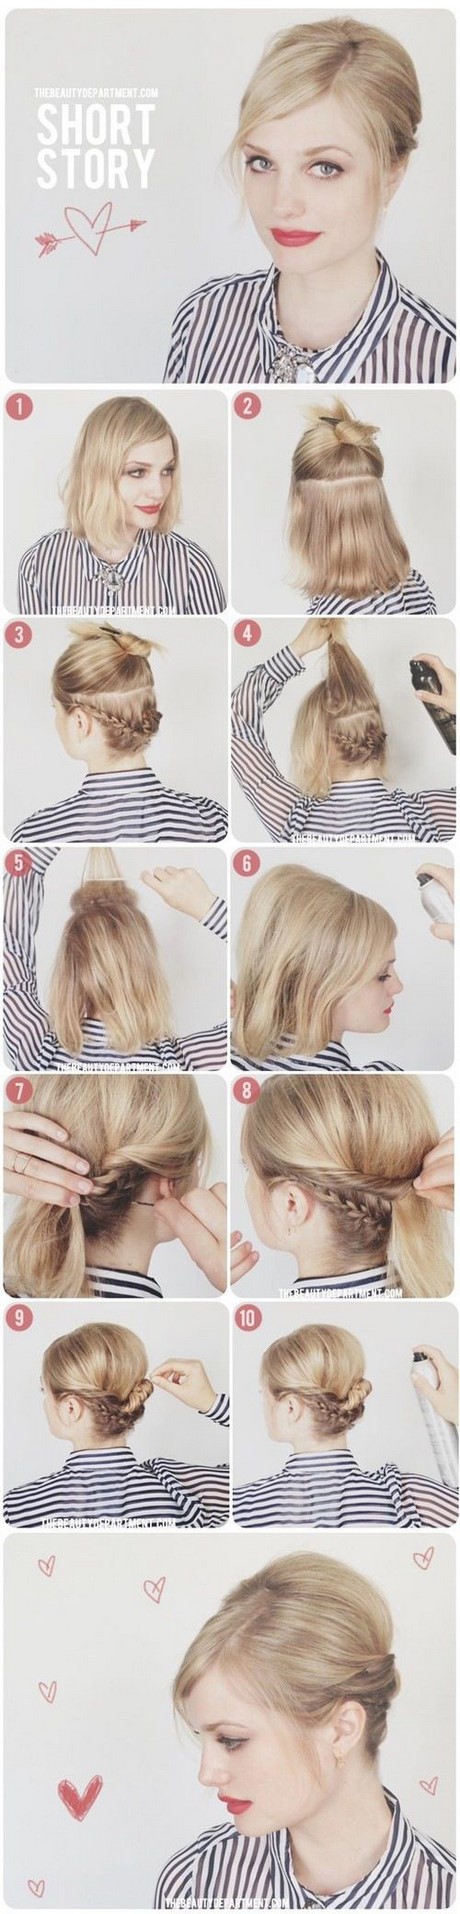 ways-to-style-short-straight-hair-00_10 Ways to style short straight hair